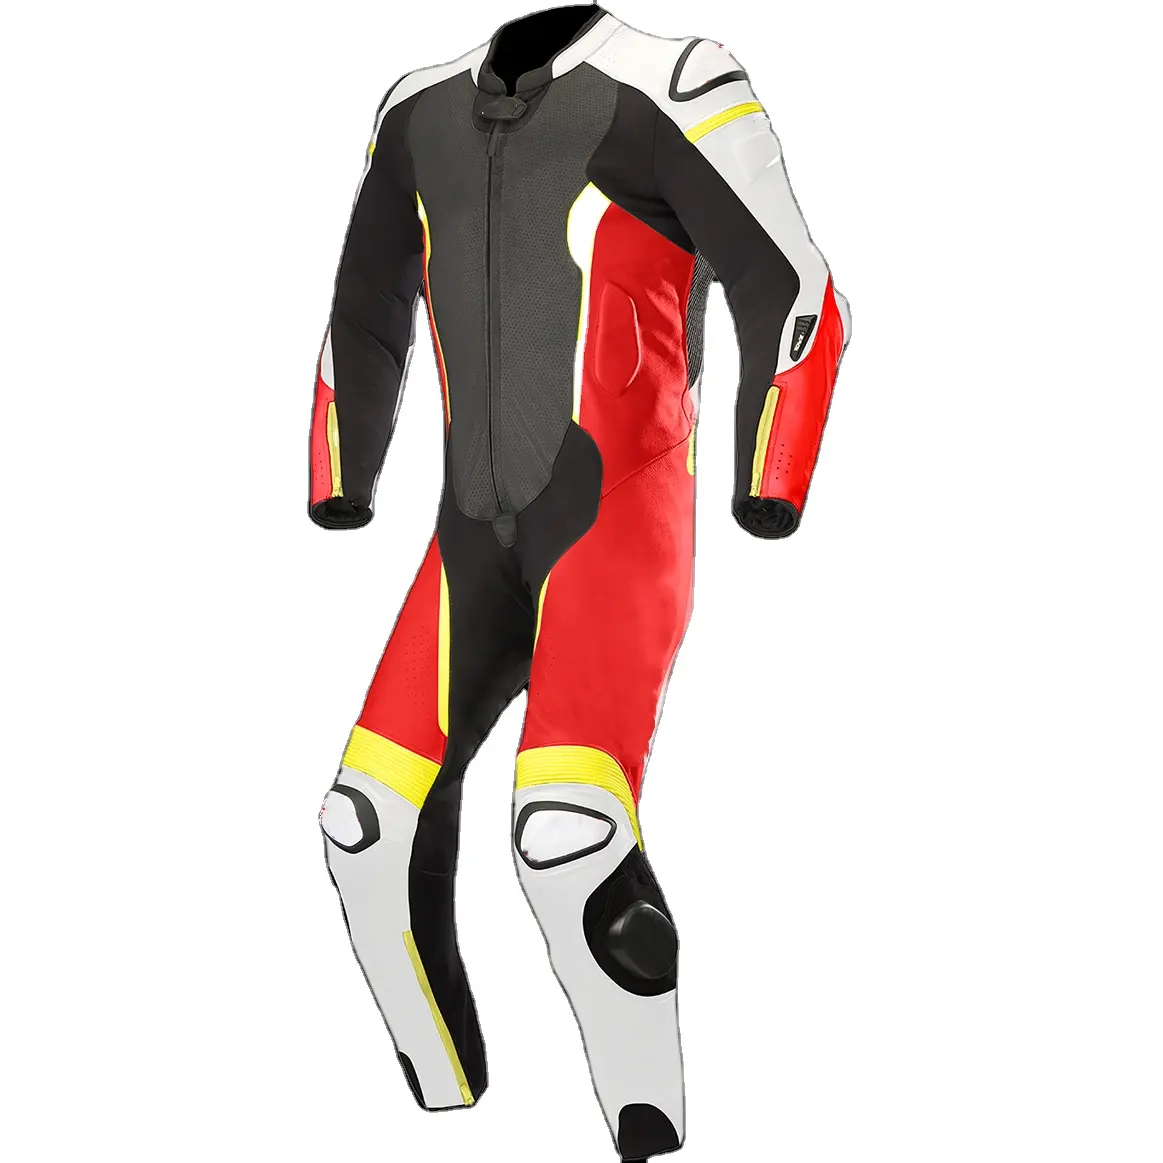 Moto gp racing suit motorbike racing suit protective in leather breathable sports wears with custom logo one piece suit